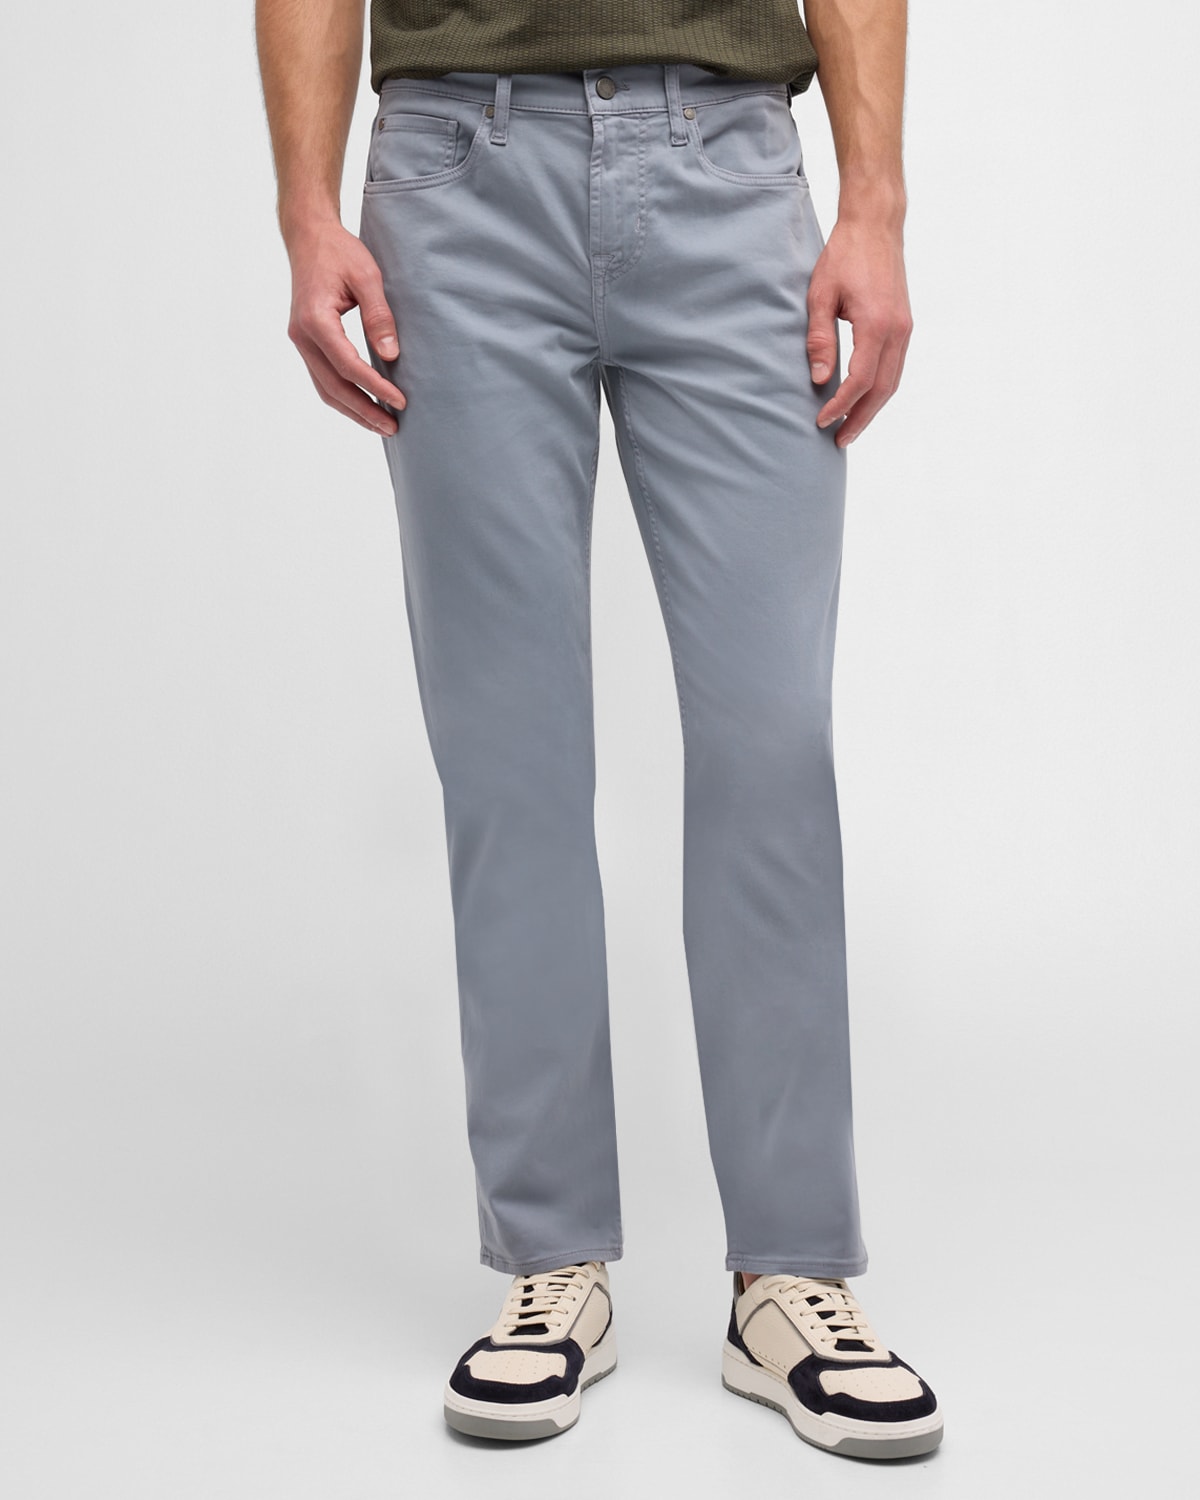 Shop 7 For All Mankind Men's Slimmy Luxe Performance Plus Pants In Dusty Blue